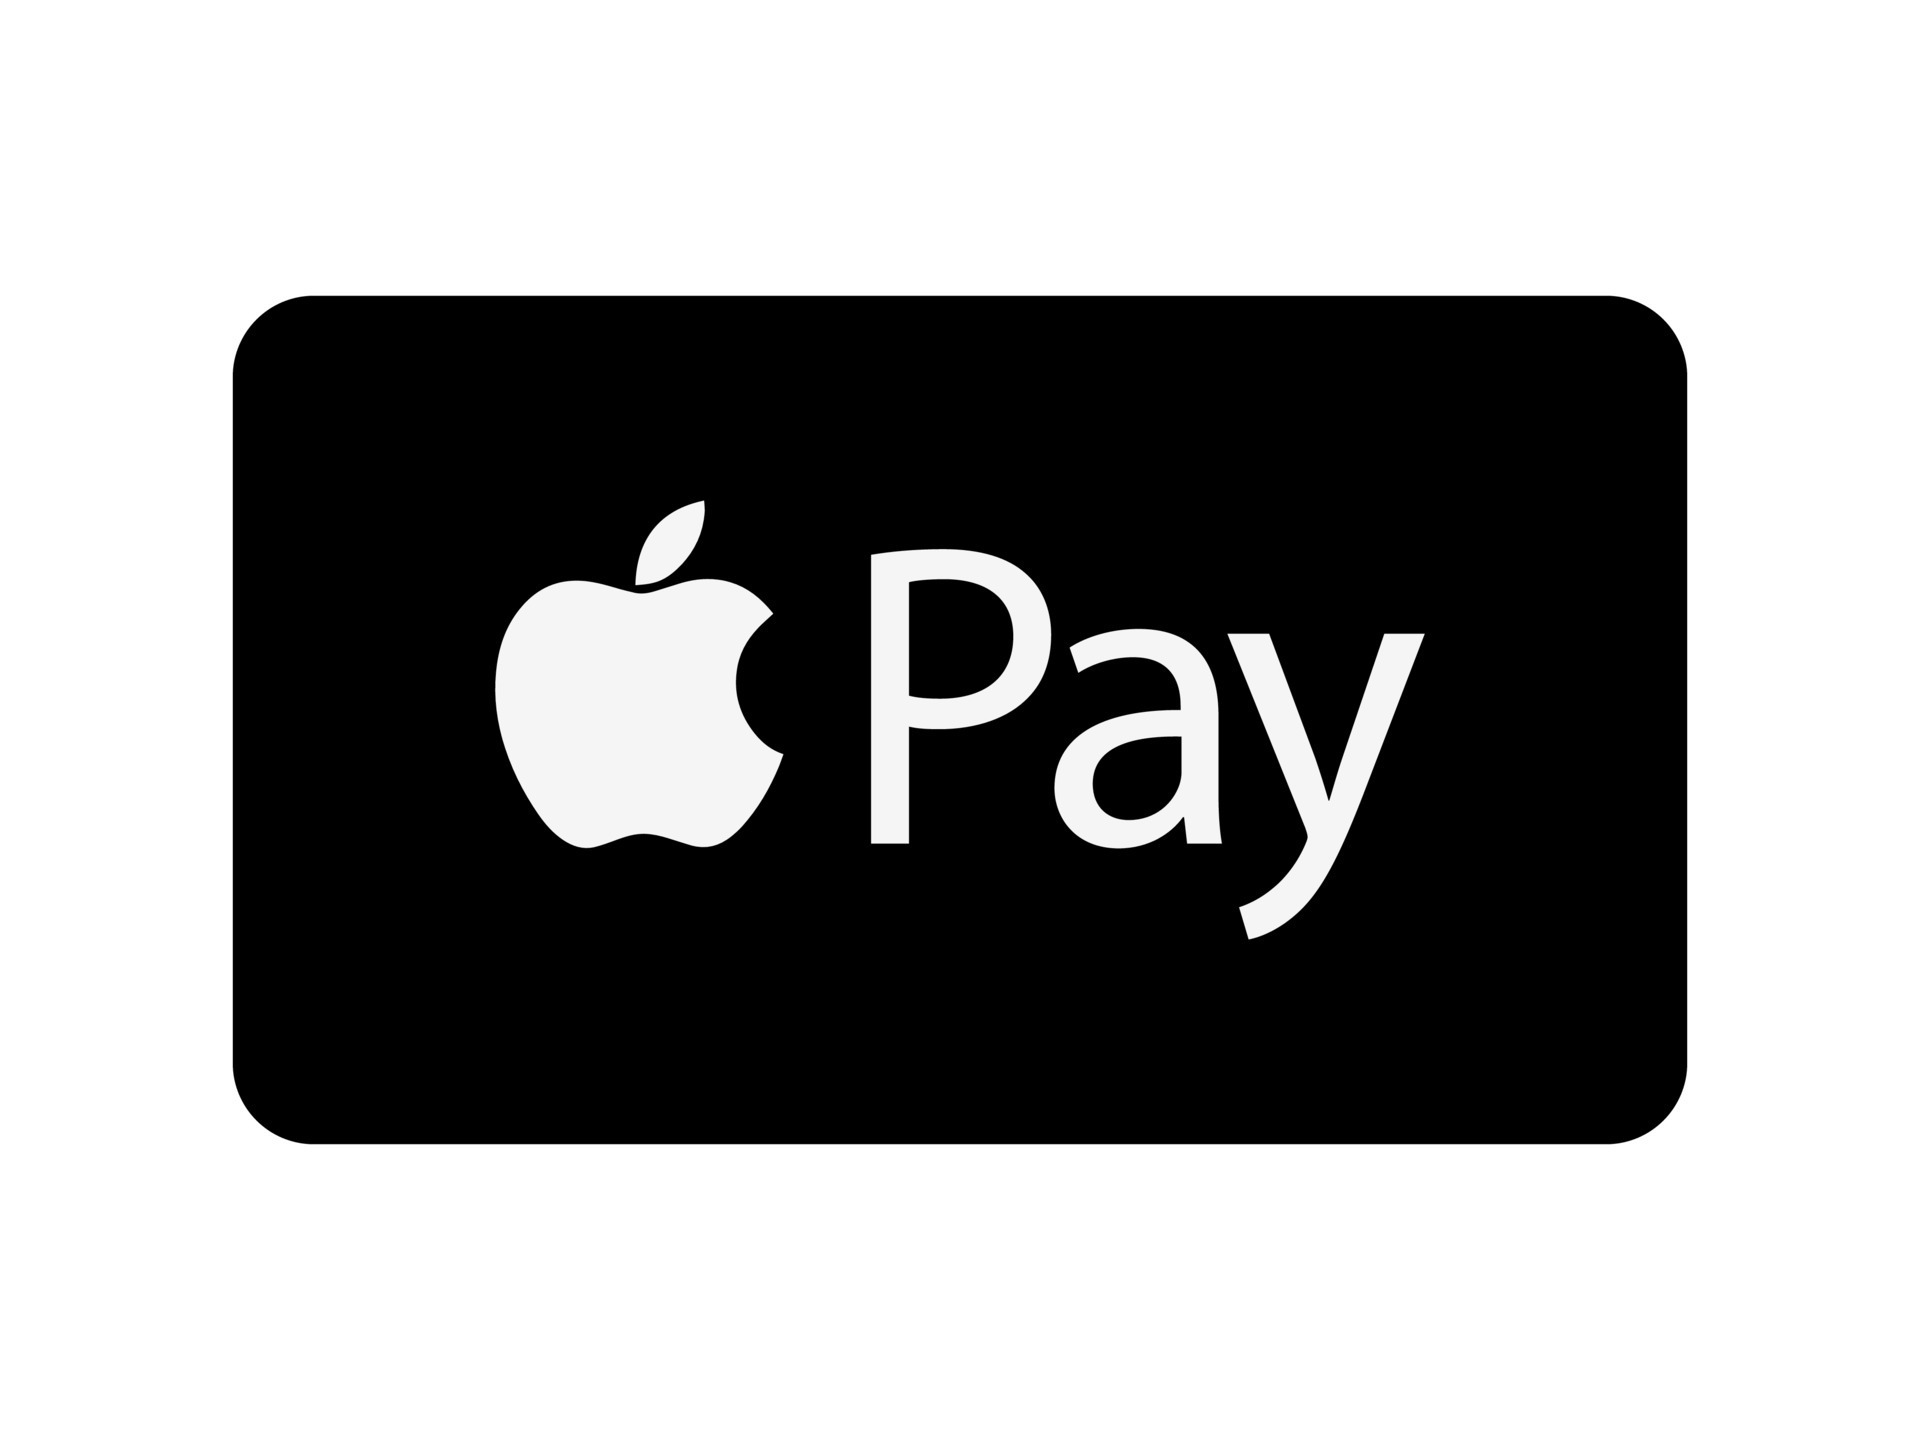 Apple Pay: Transforming Digital Payments and Consumer Experience